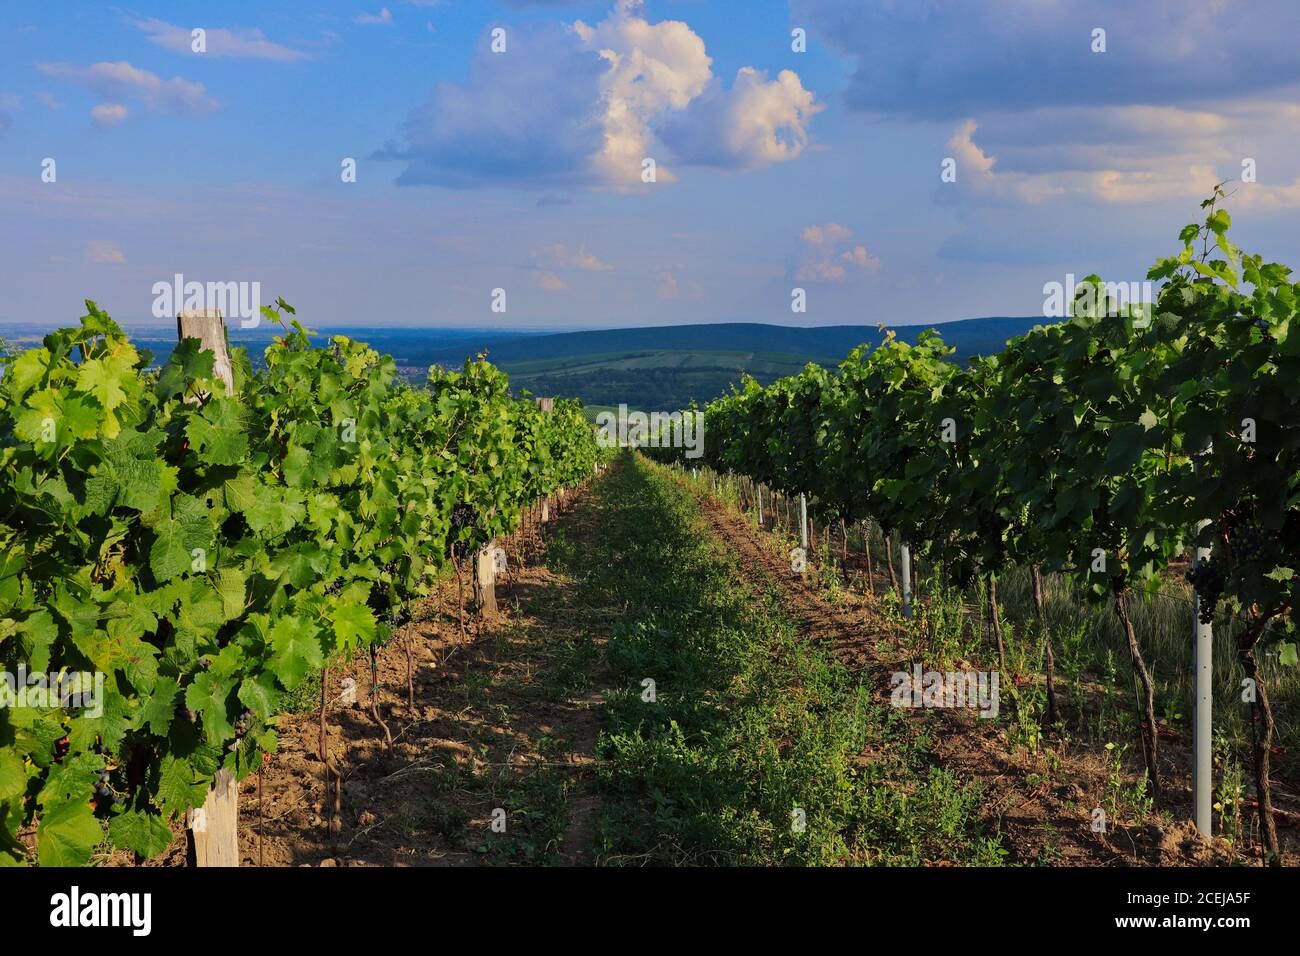 Vineyard in Palava Protected Landscape Area with Beautiful View in the Distance. Green Plants of the Common Grape Vine (Vitis Vinifera) in Moravia. Stock Photo